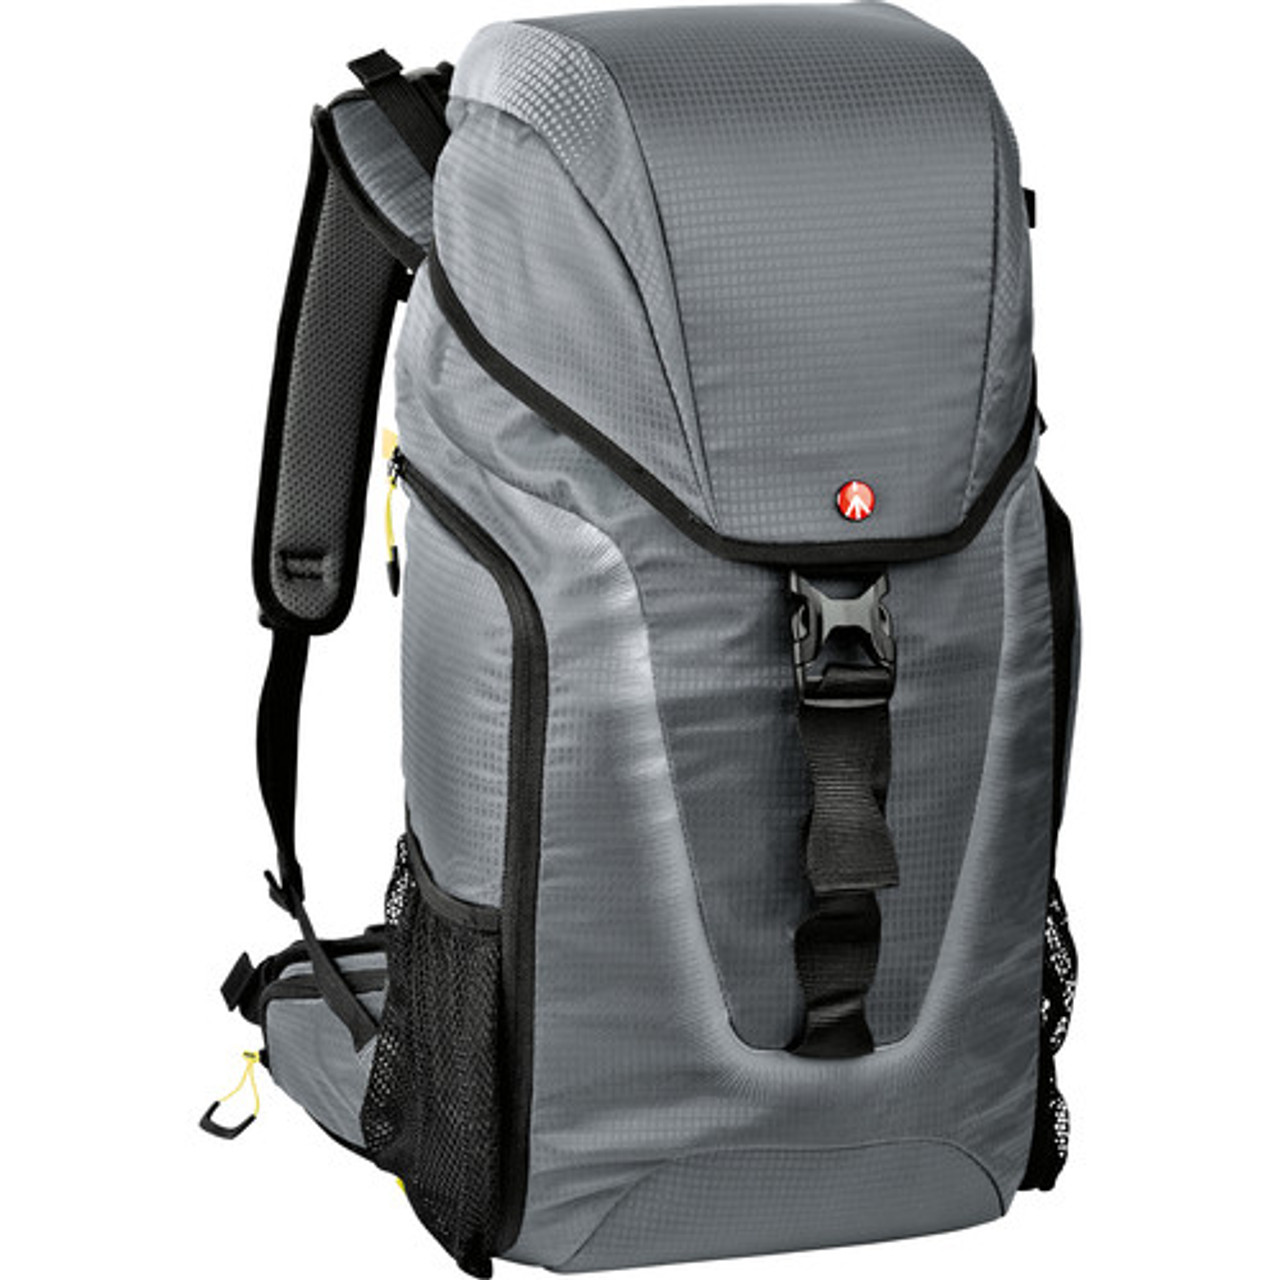 Manfrotto Aviator Hover-25 Drone Backpack for DJI Mavic Osmo